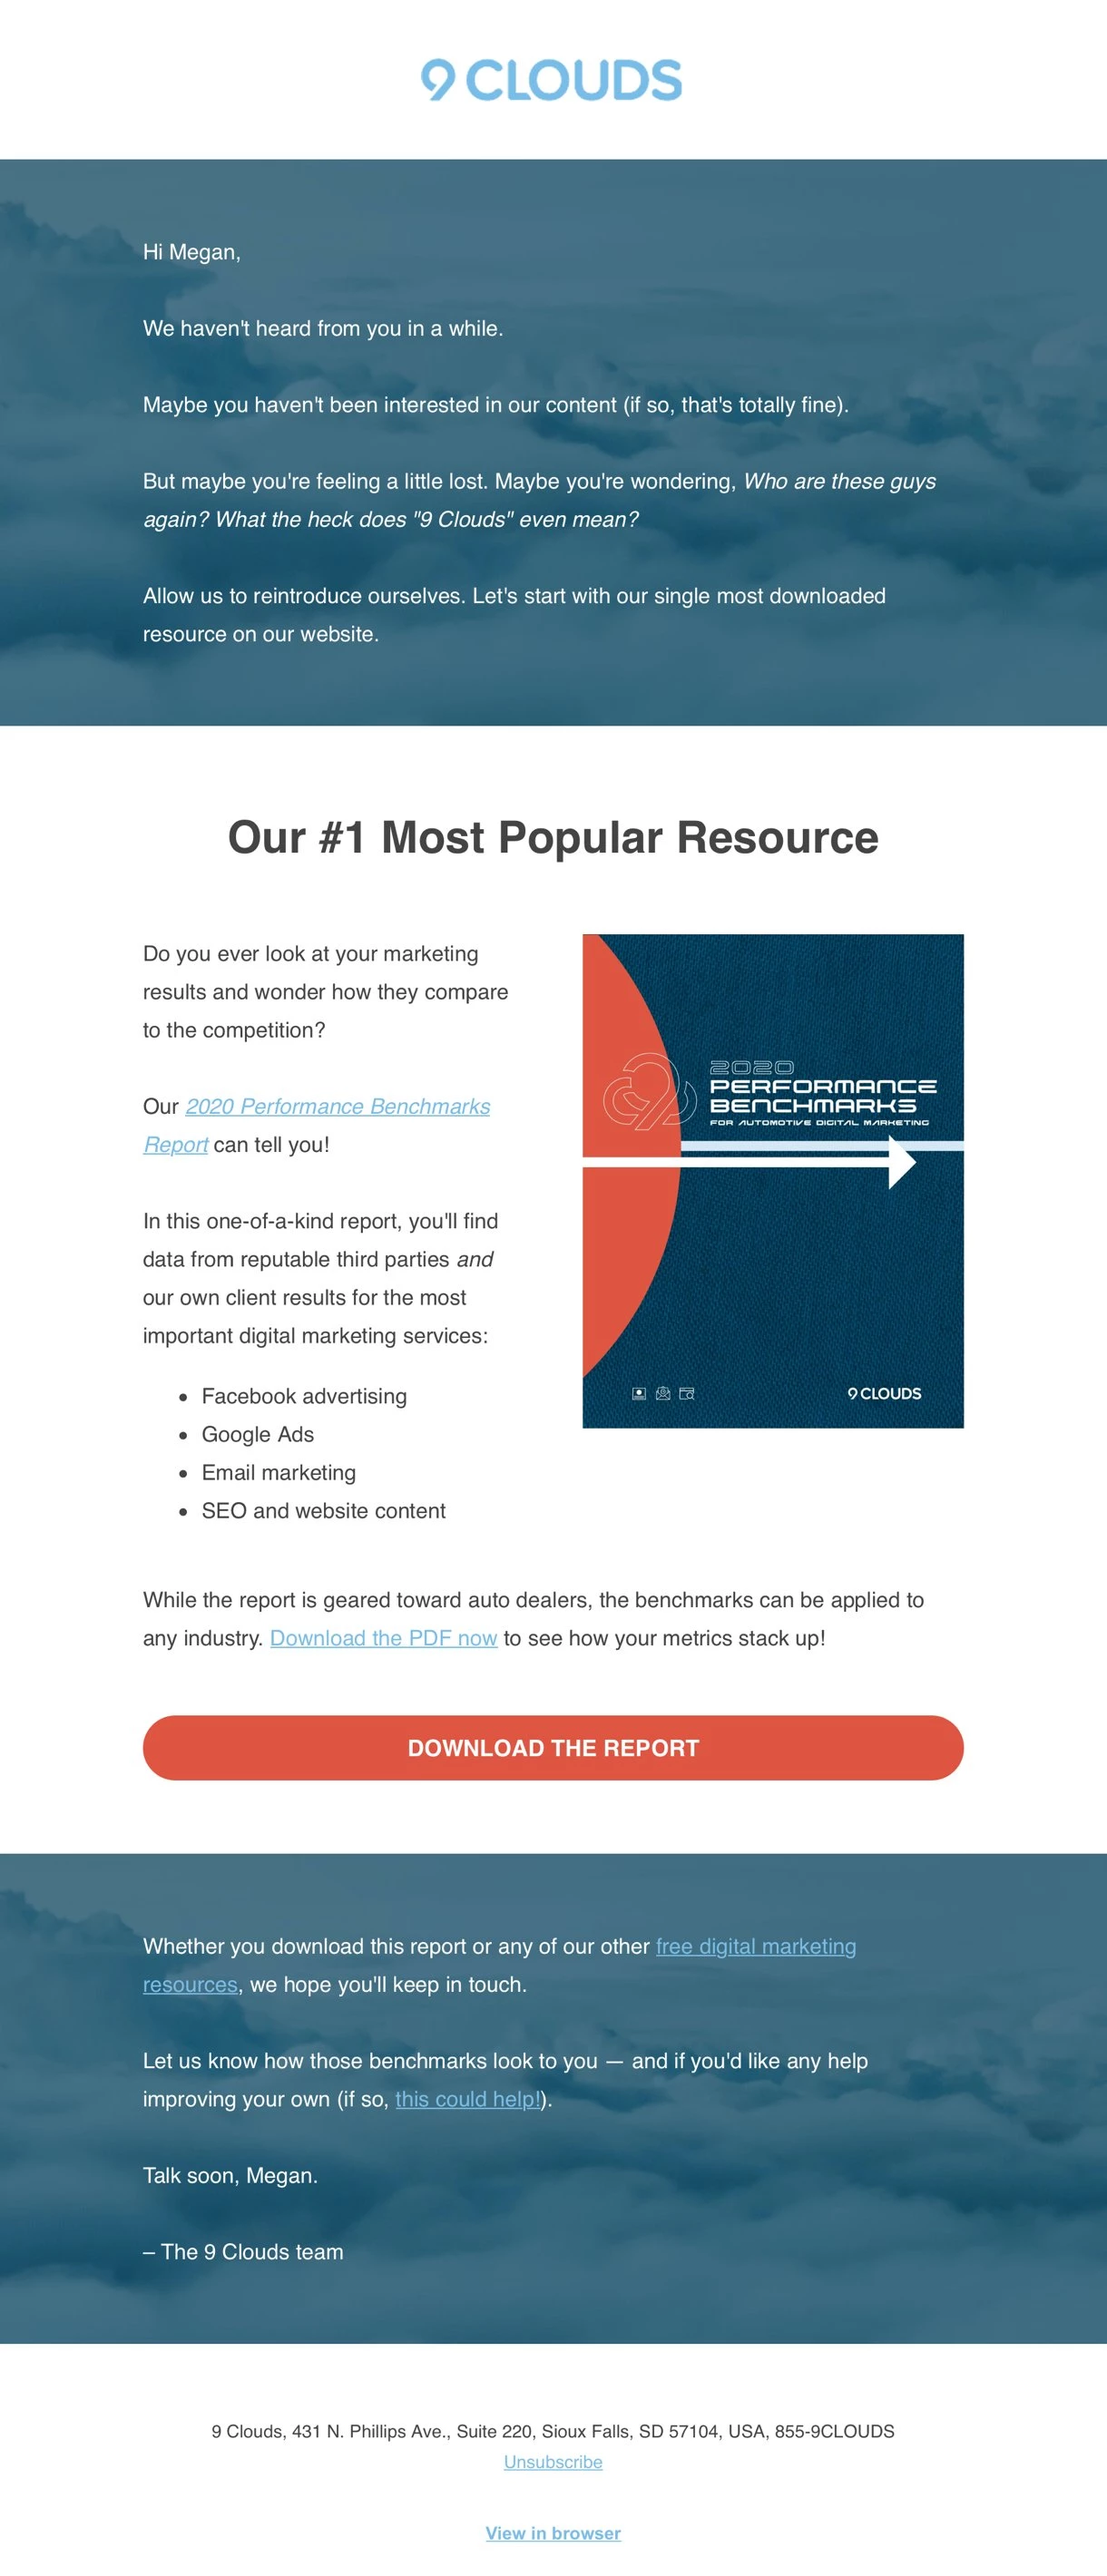 9 Clouds follow-up re-engagement email campaign example - download report